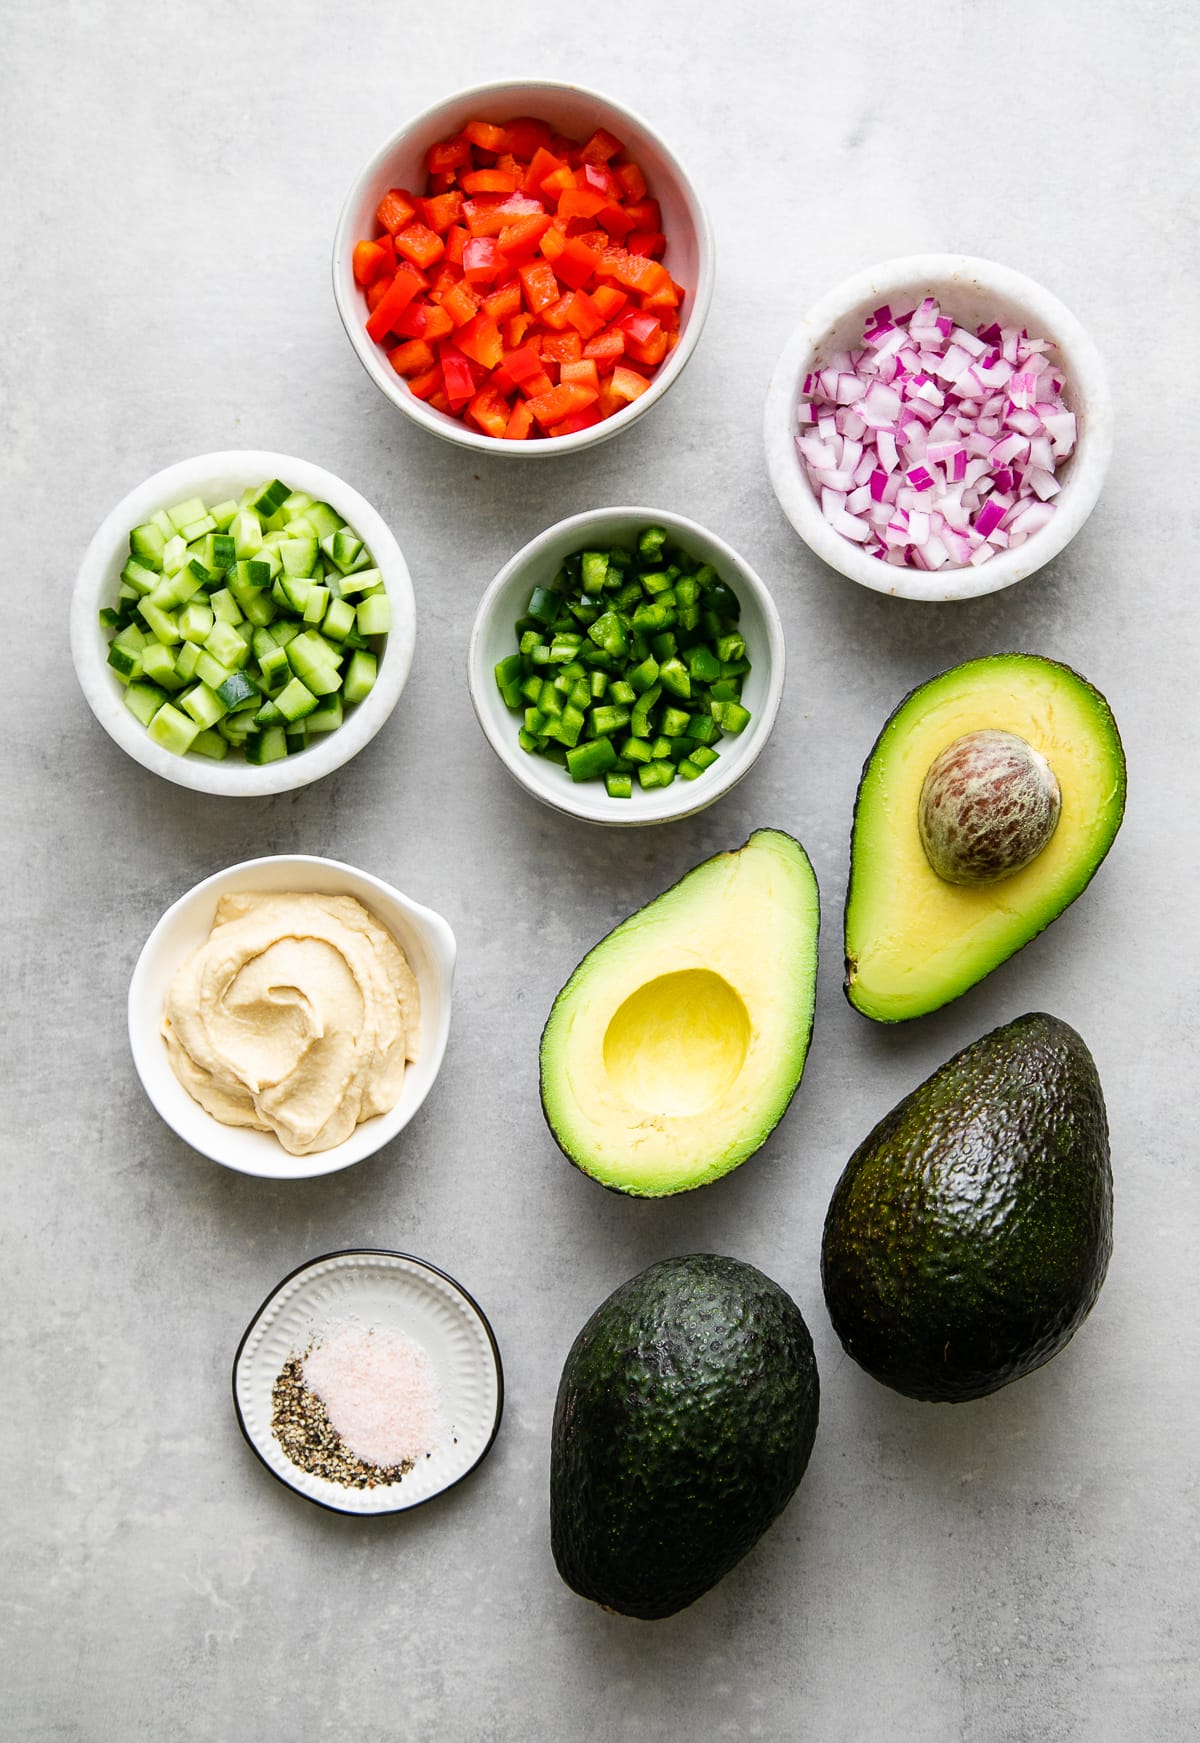 ingredients used to make stuffed avocados.